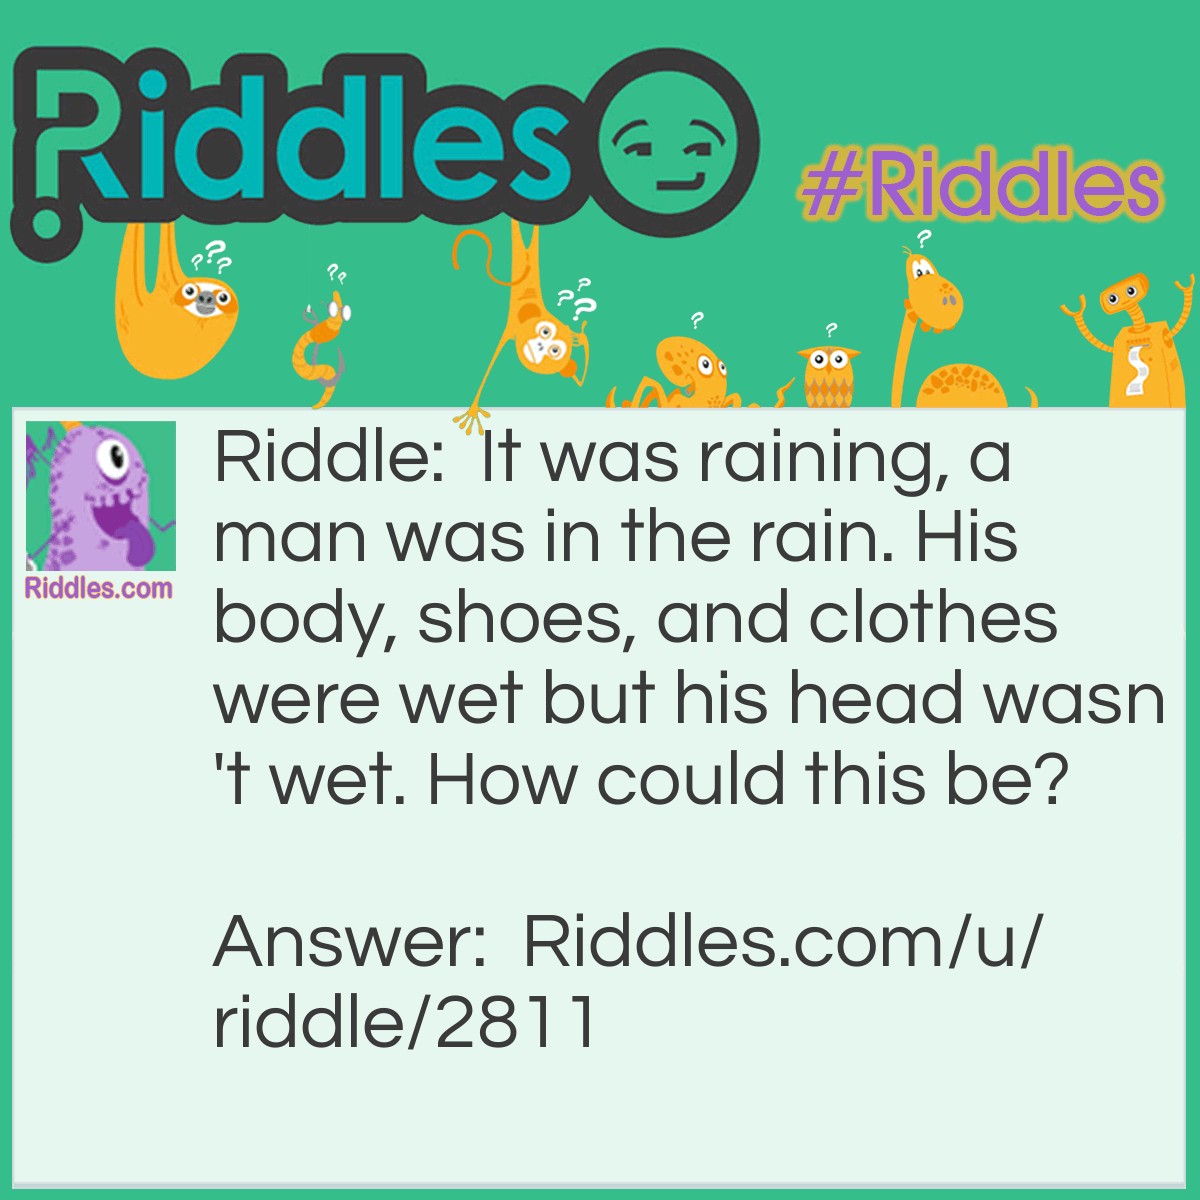 Riddle: It was raining, a man was in the rain. His body, shoes, and clothes were wet but his head wasn't wet. How could this be? Answer: he is bald!